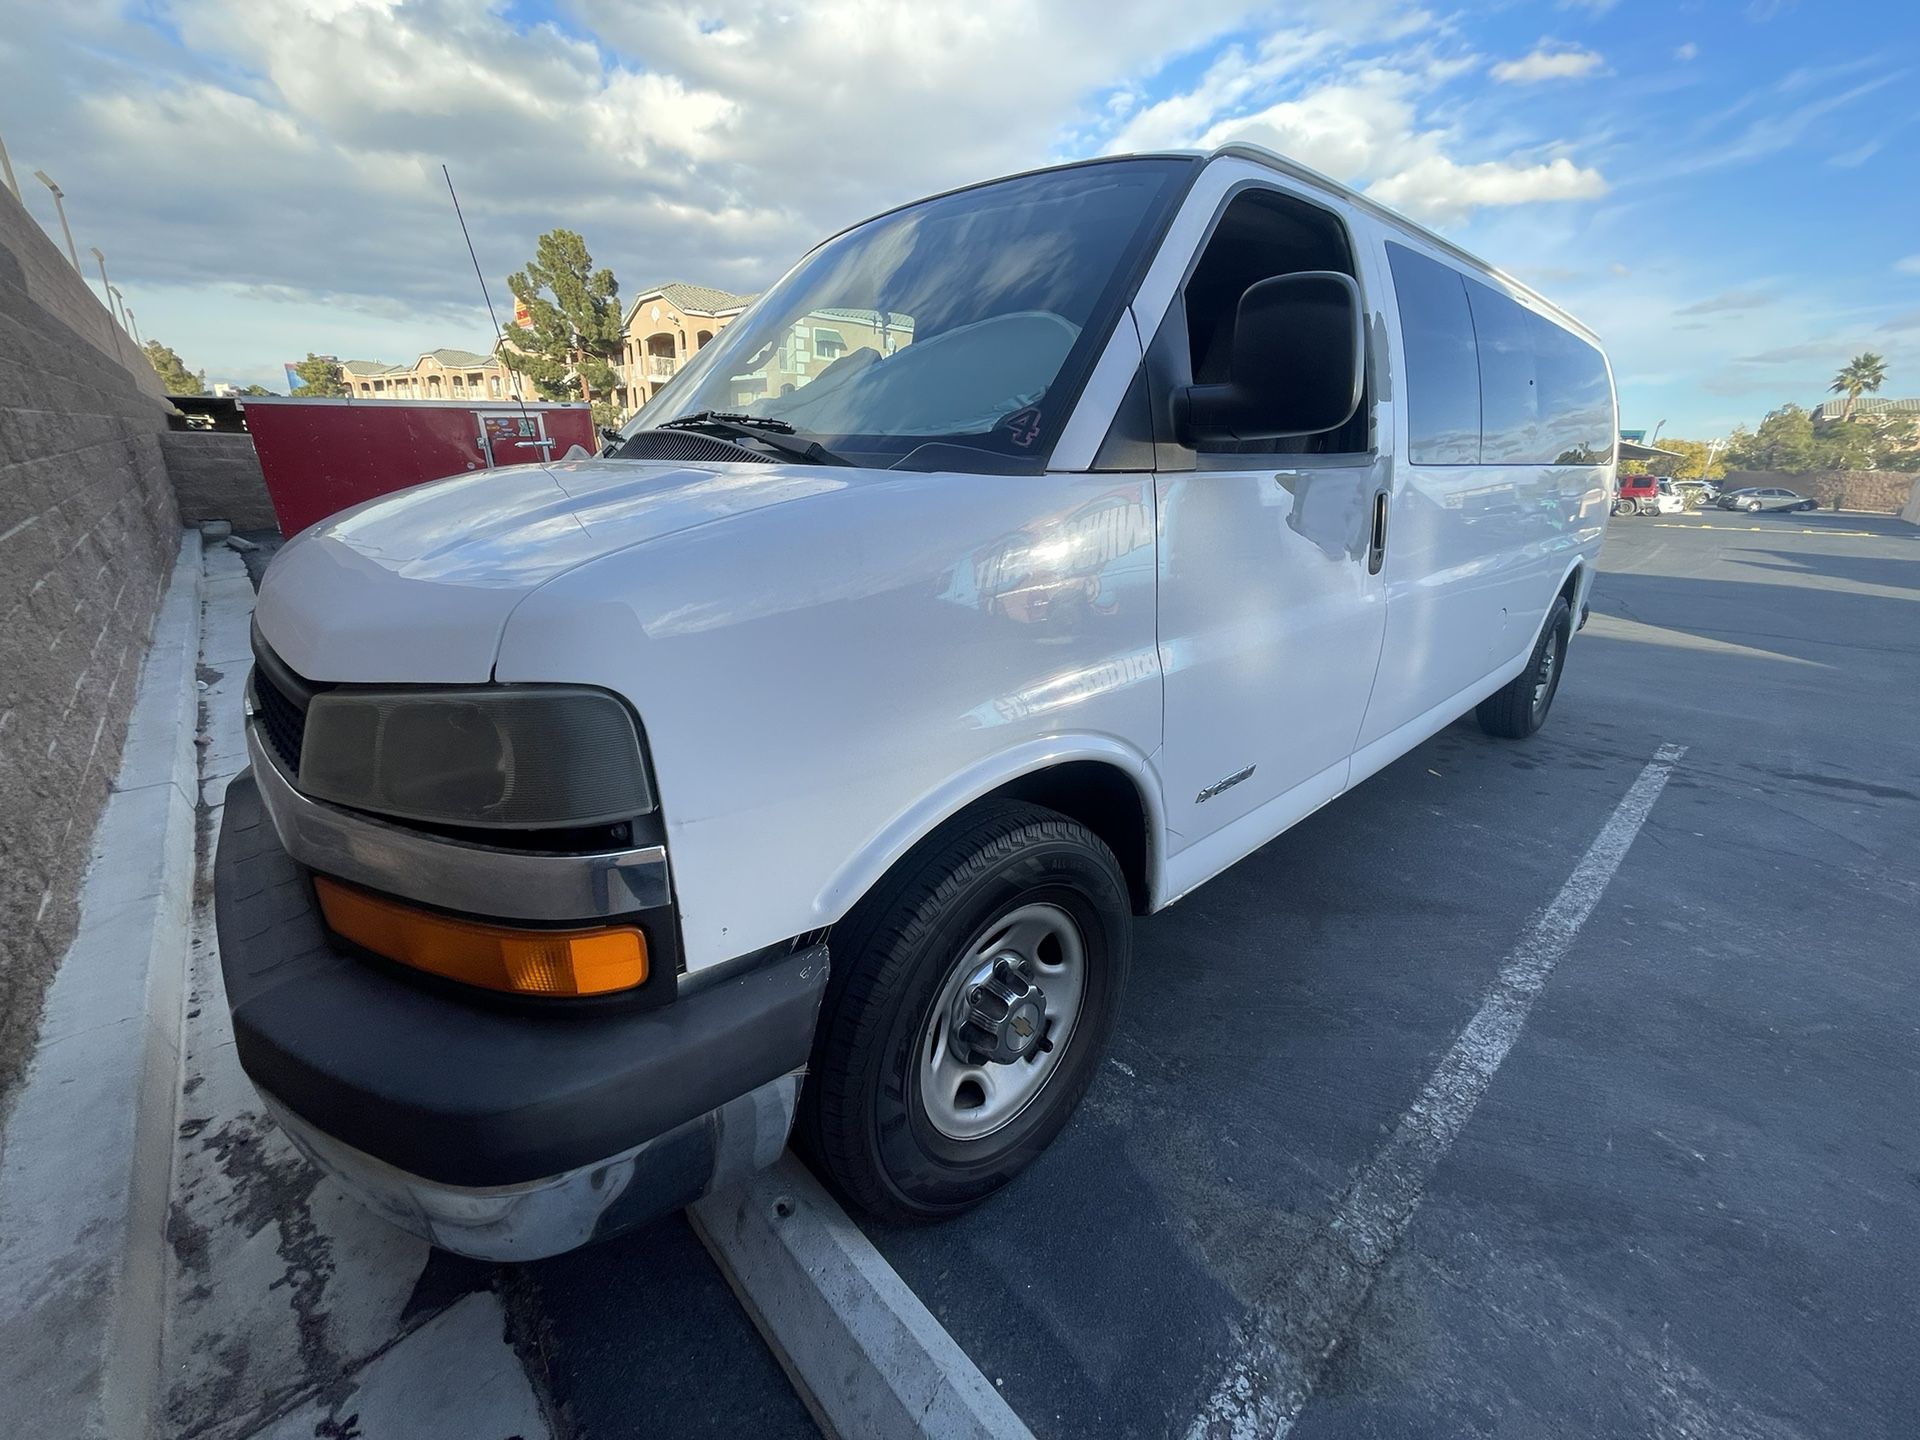 2006 Chevrolet Express 3500 for Sale in Las Vegas, NV - OfferUp